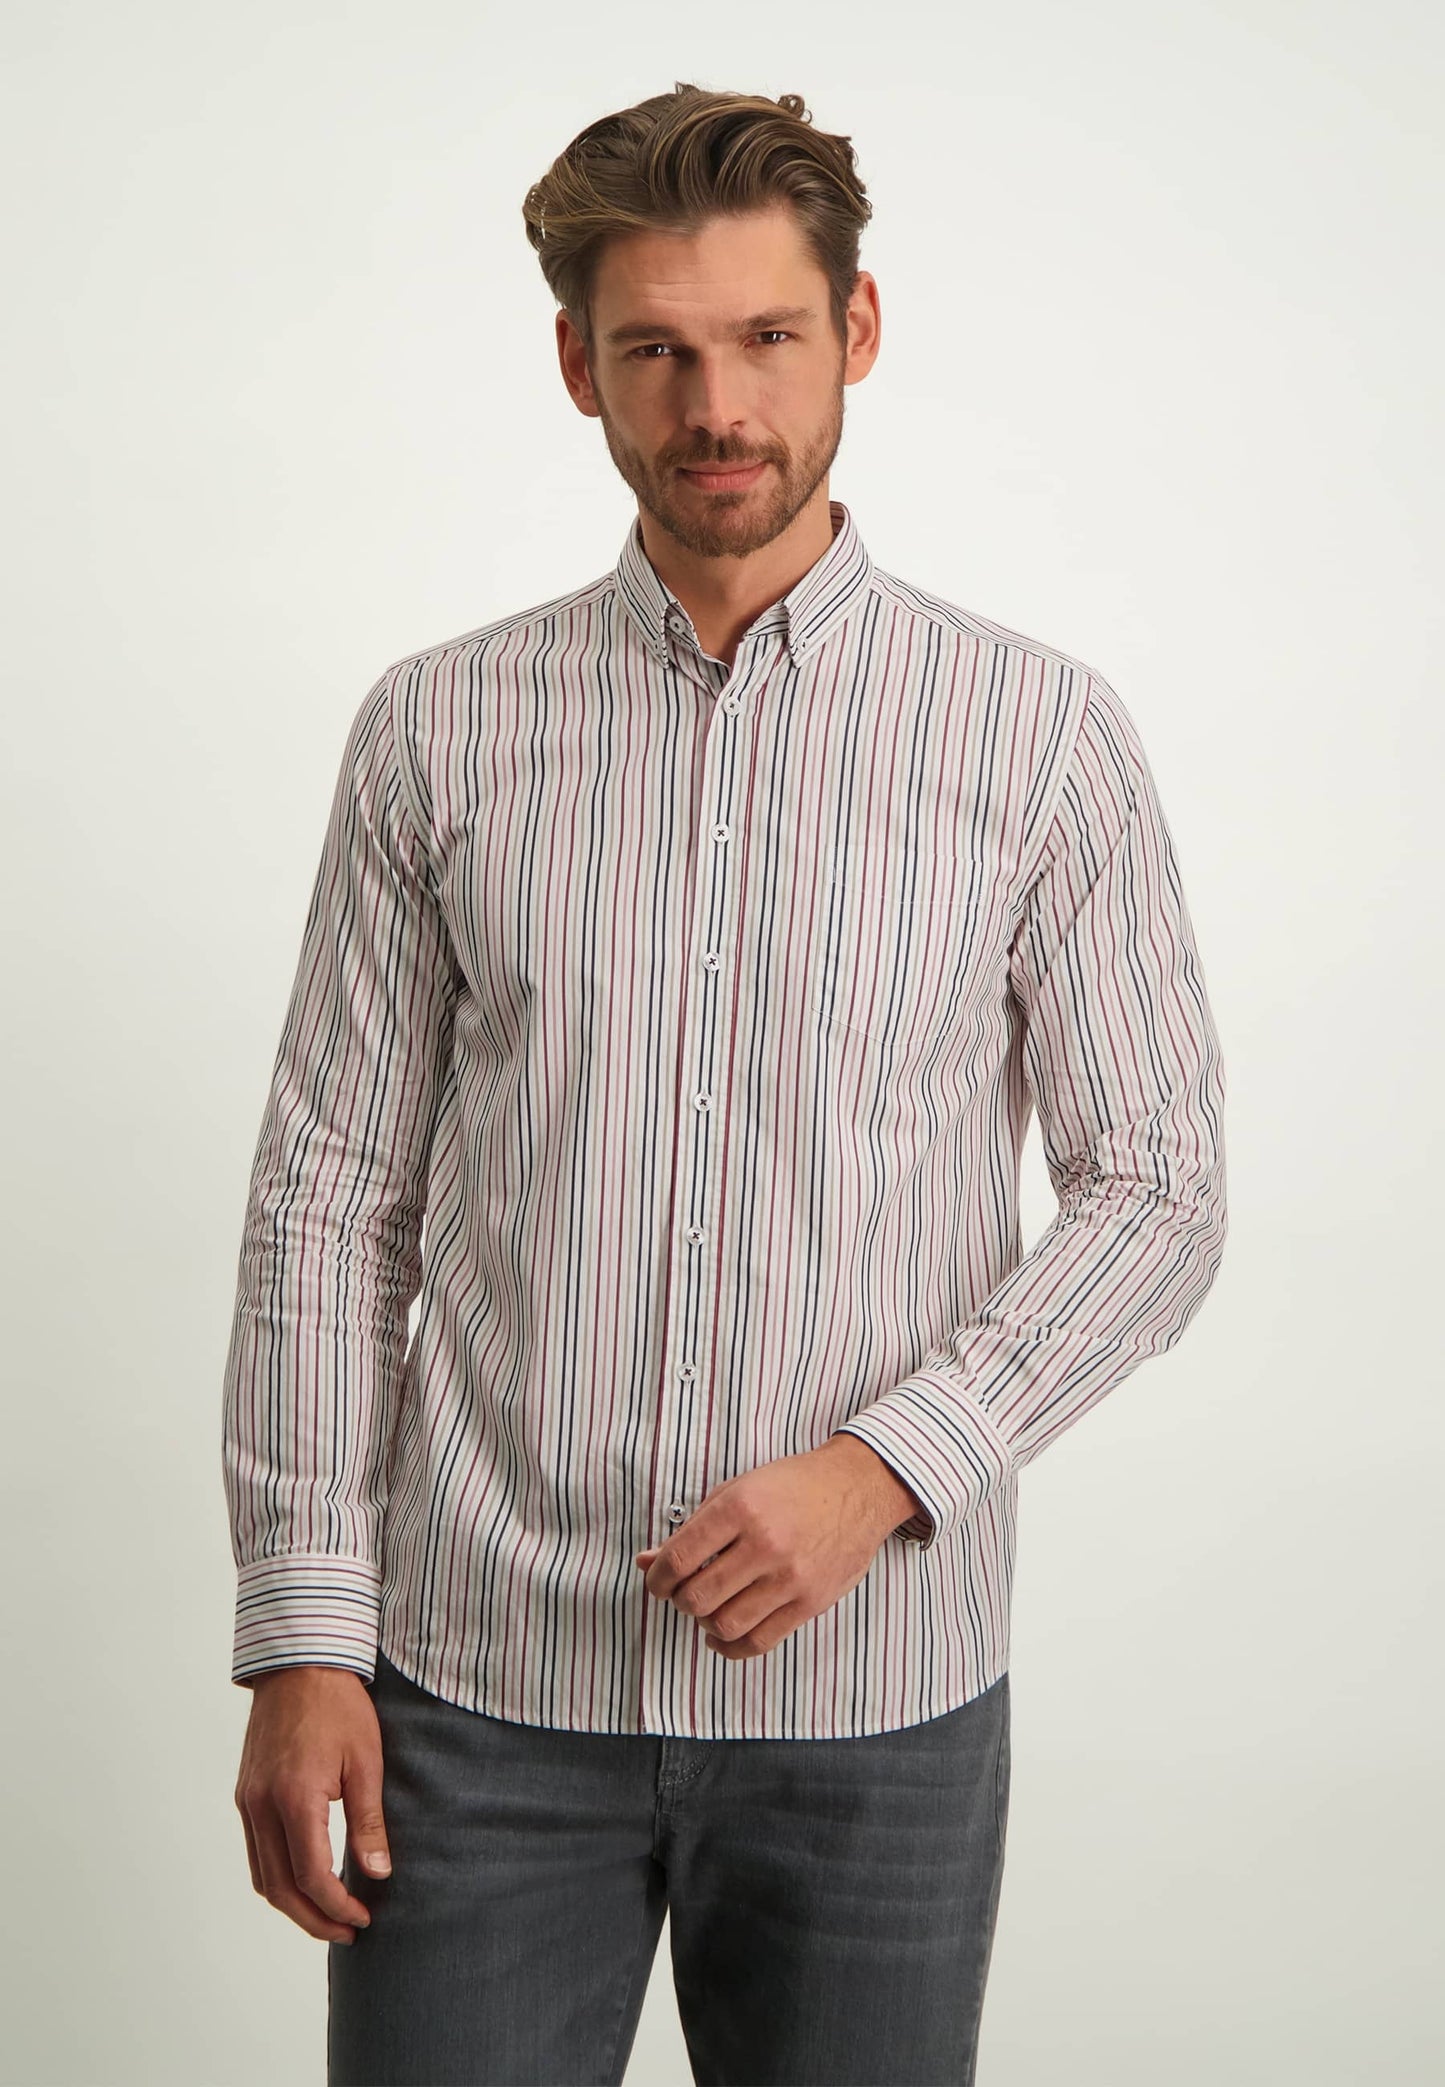 Raspberry red striped cotton regular fit shirt State of Art - 13208/1142